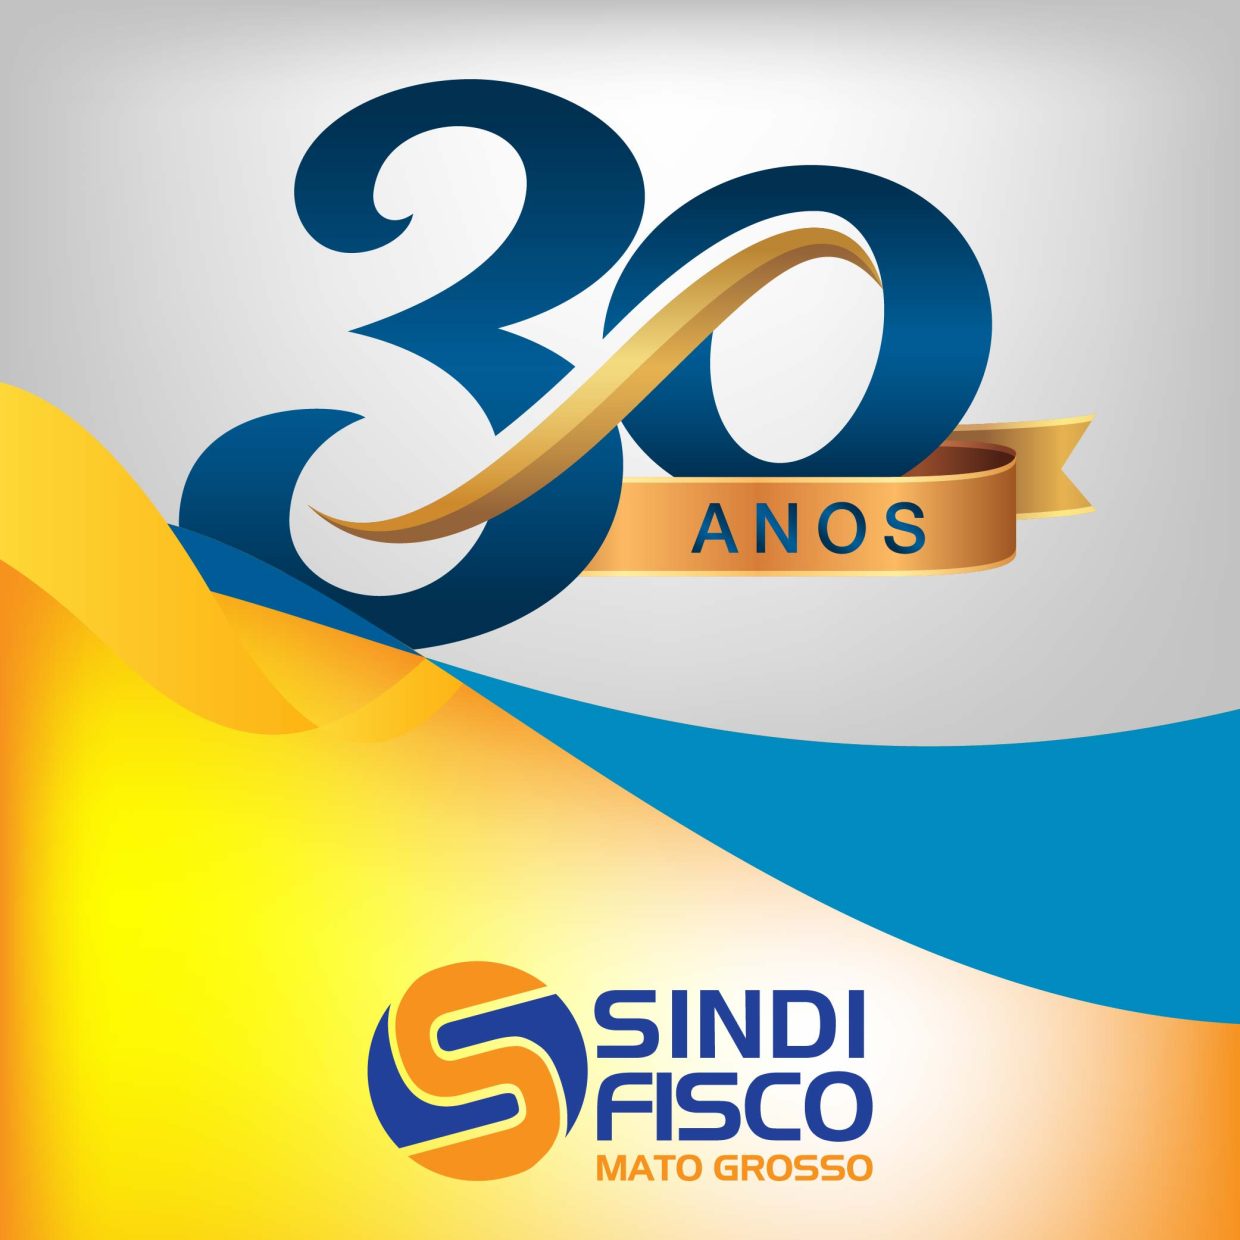 Post - 30 anos - Sindifisco-02